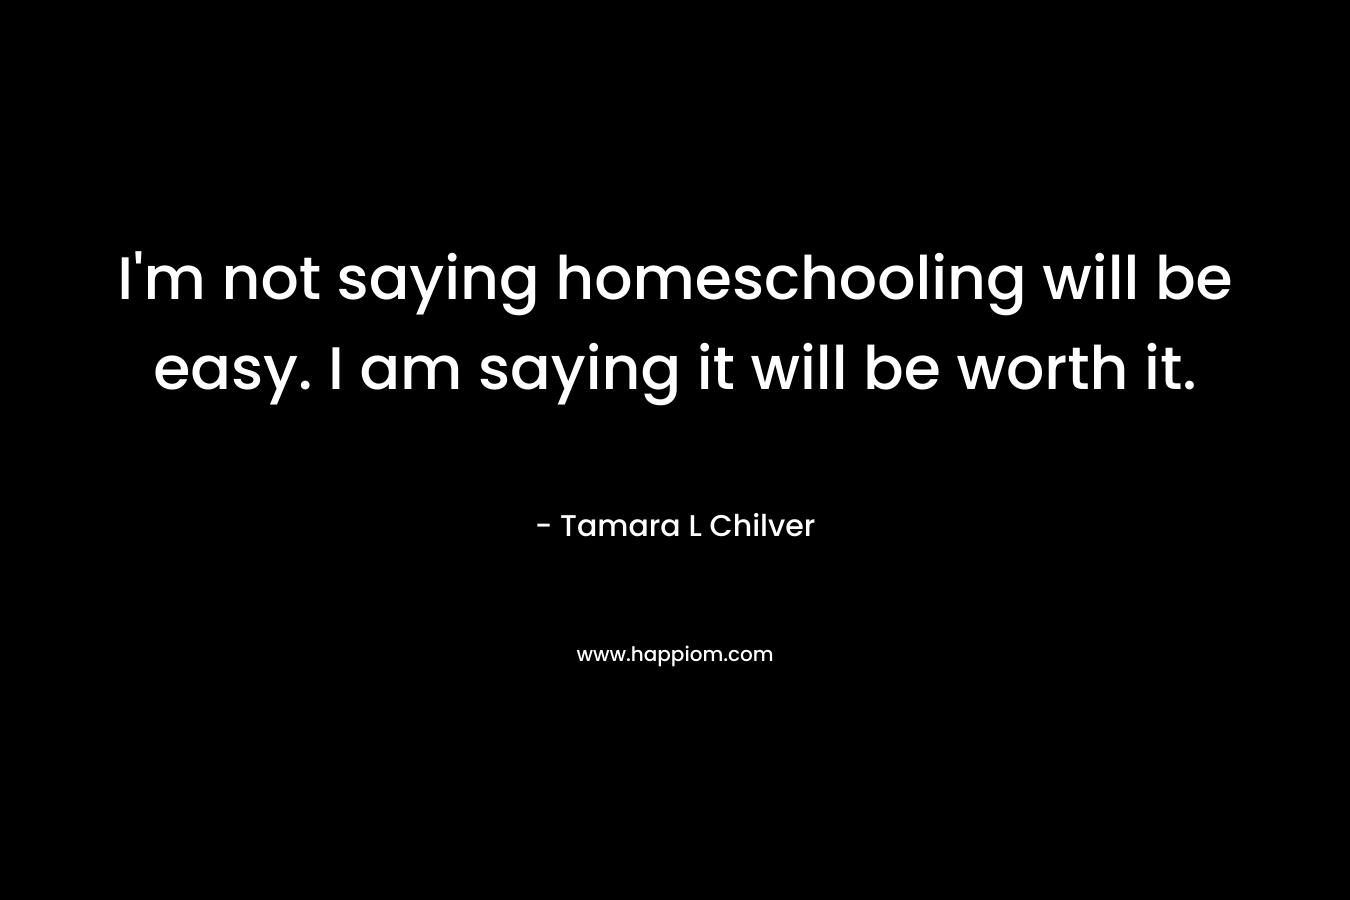 I'm not saying homeschooling will be easy. I am saying it will be worth it.